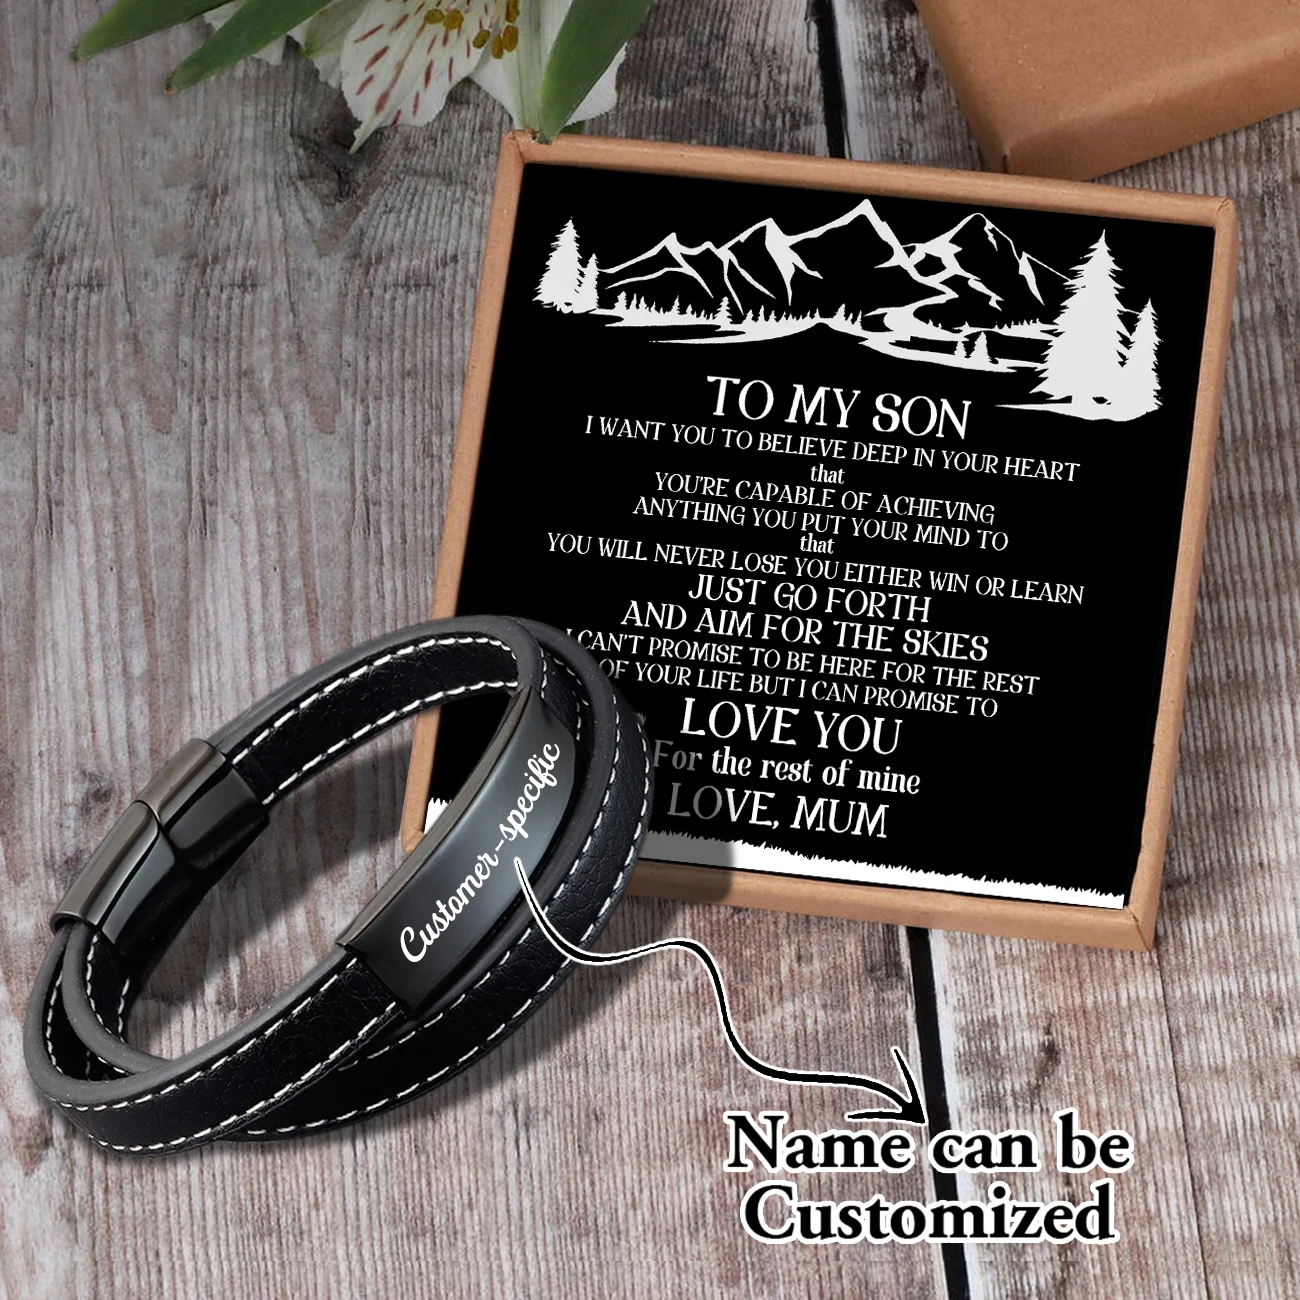 

Sam3012 Mum To My Son Name Can Be Customized Woven Bracelet Card text Men's Fashion Magnet Clasp Multi-layer Leather Bracelet